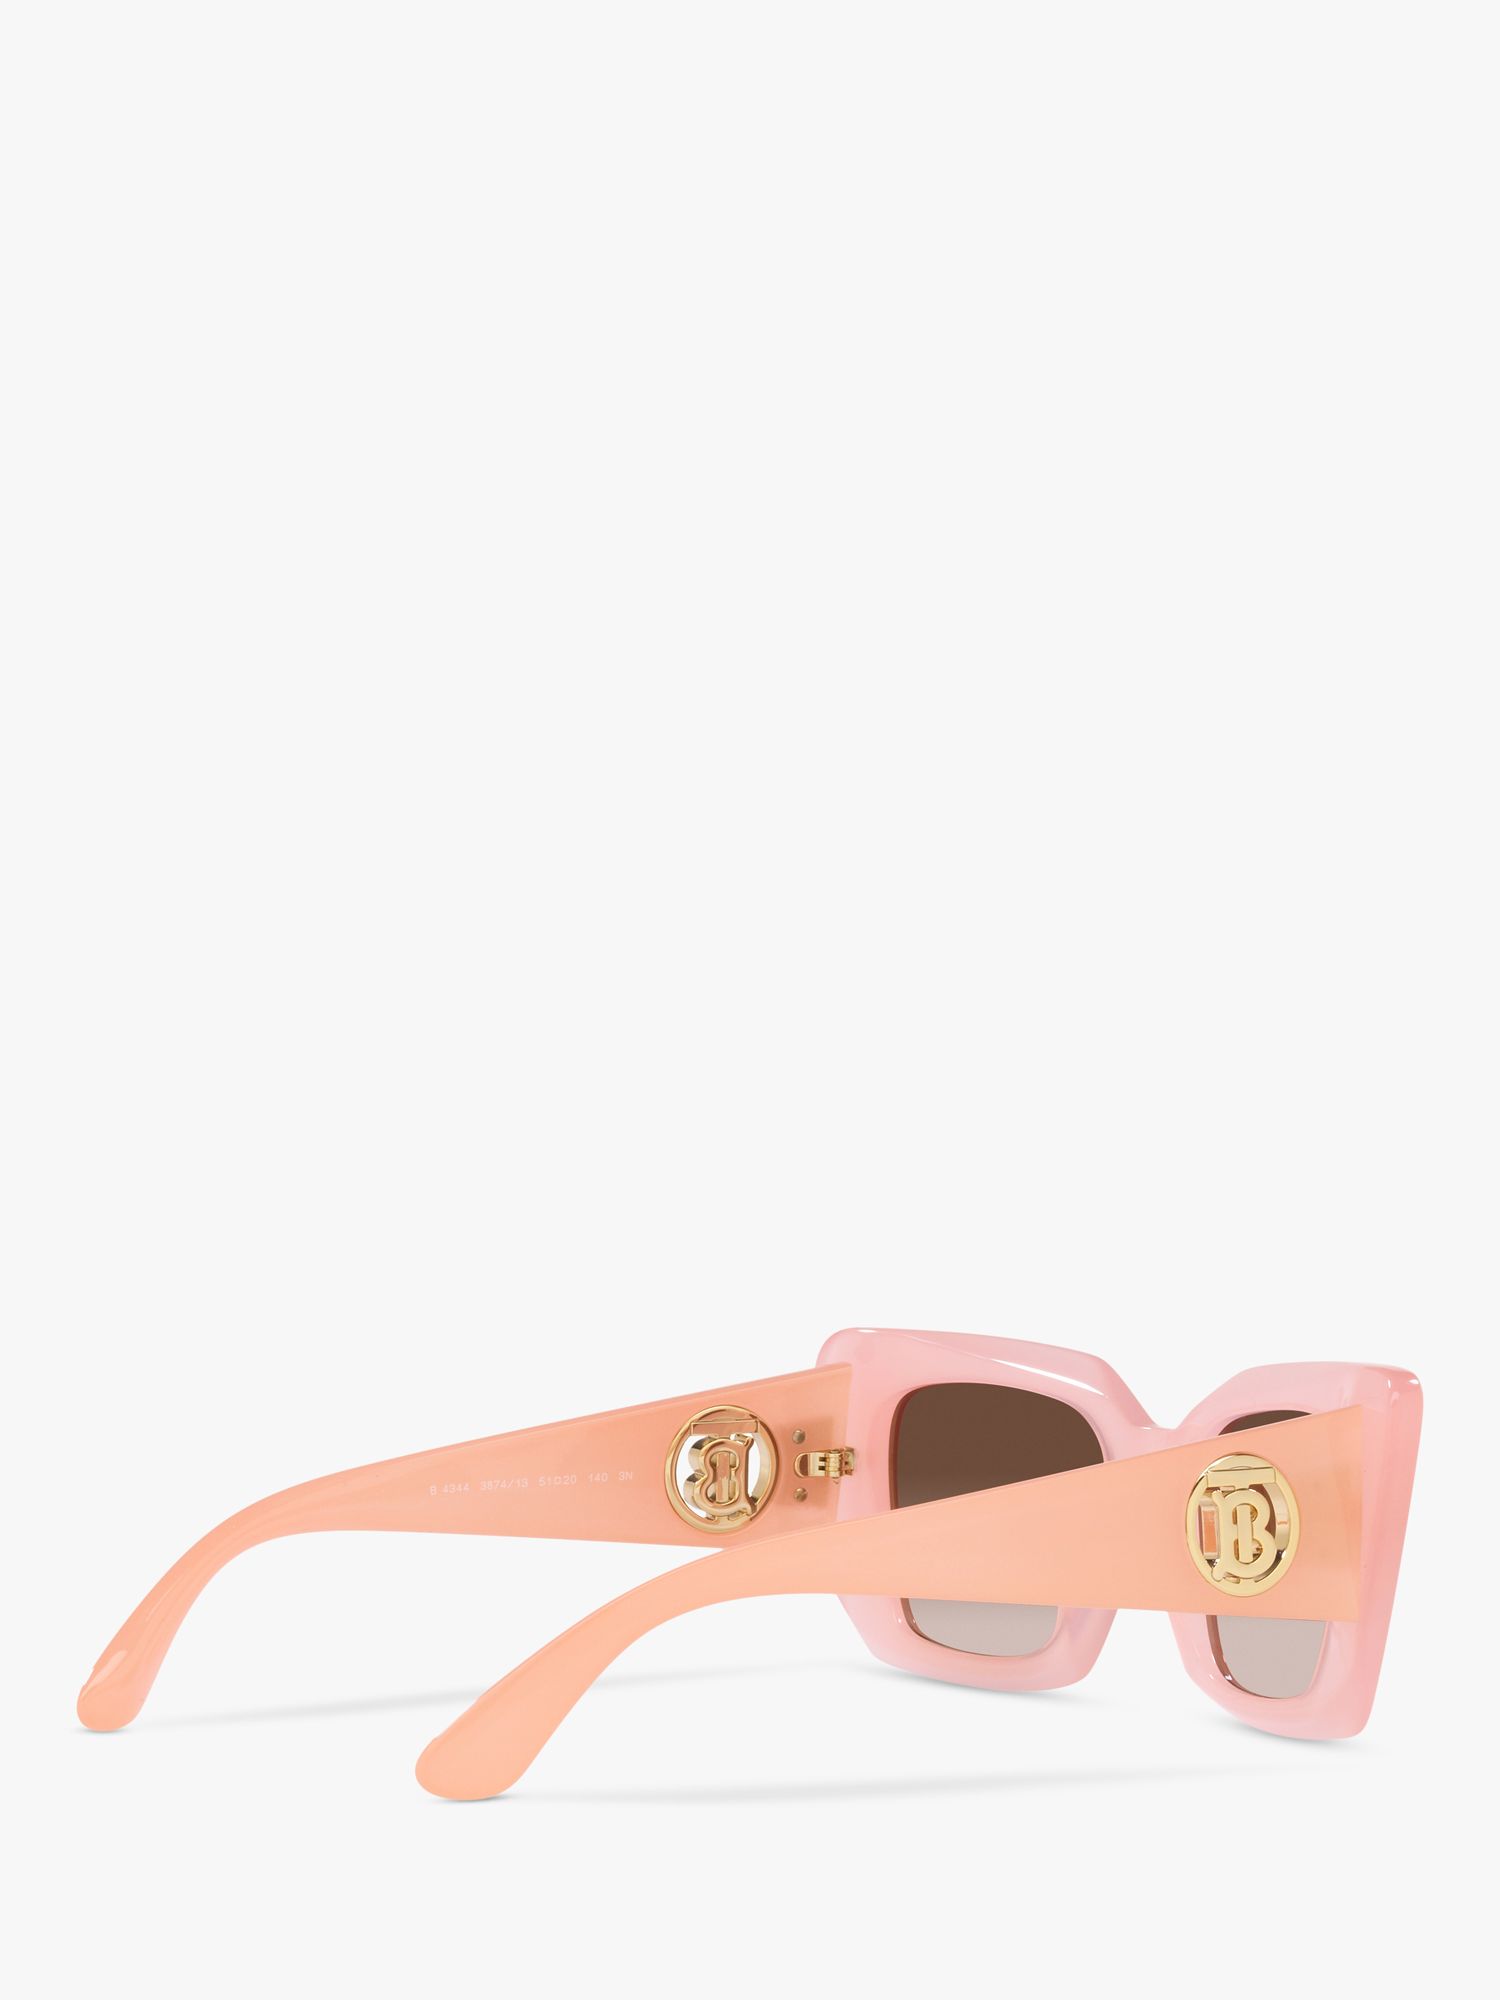 Burberry BE4344 Women's Square Sunglasses, Pink/Brown Gradient